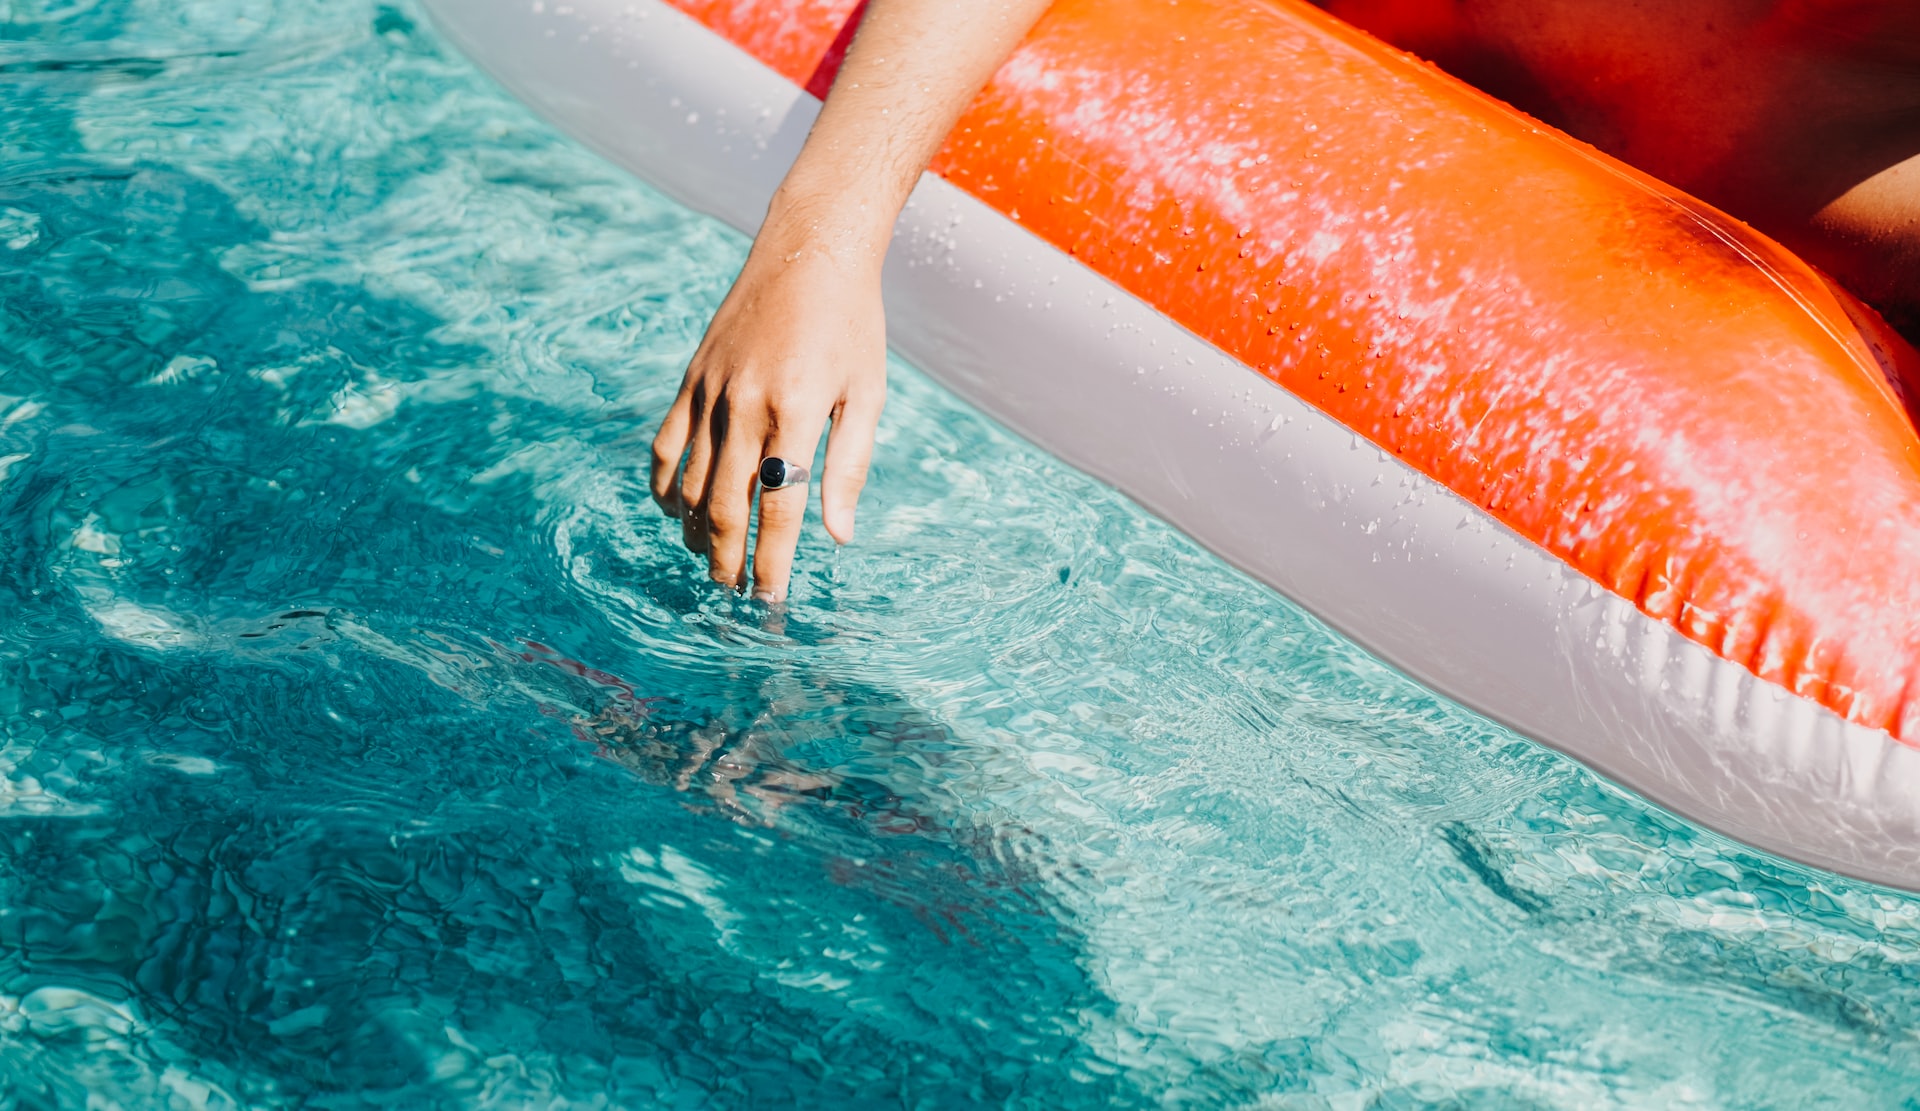 How to Clean a Pool Without Using Chemicals